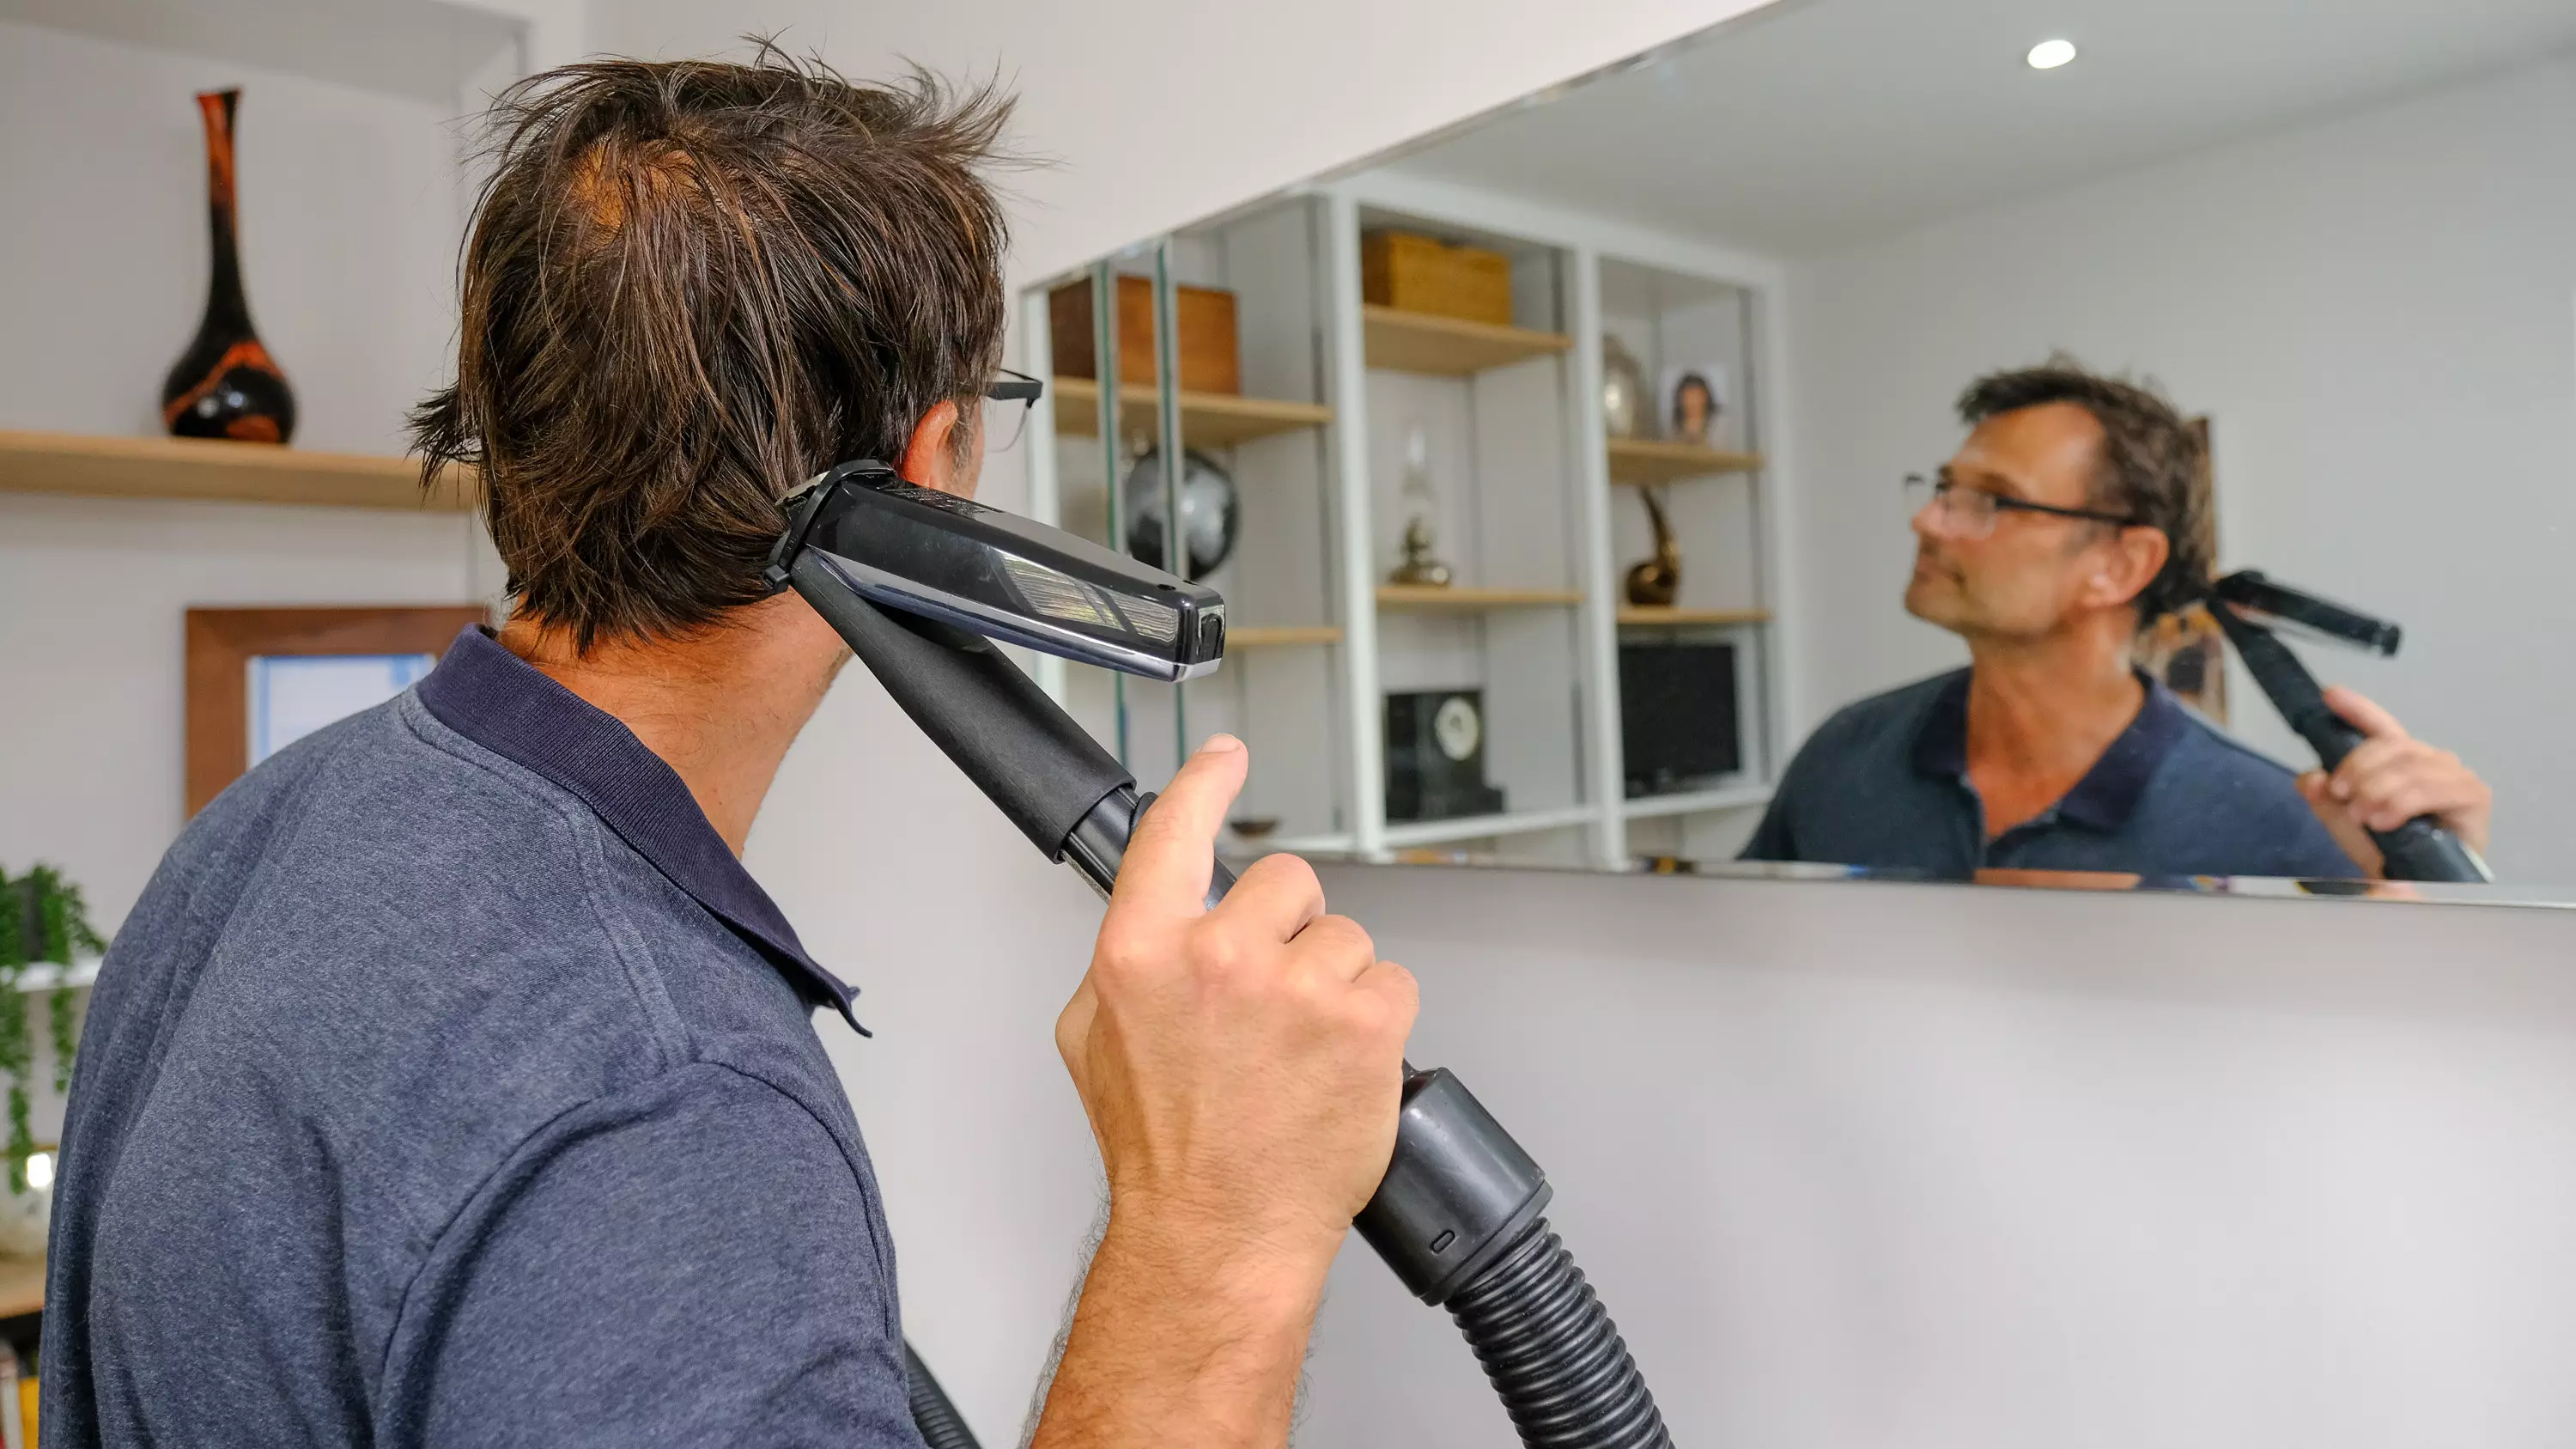 Inventor Creates Bizarre DIY Hair Trimmer Using Clippers And Vacuum Cleaner